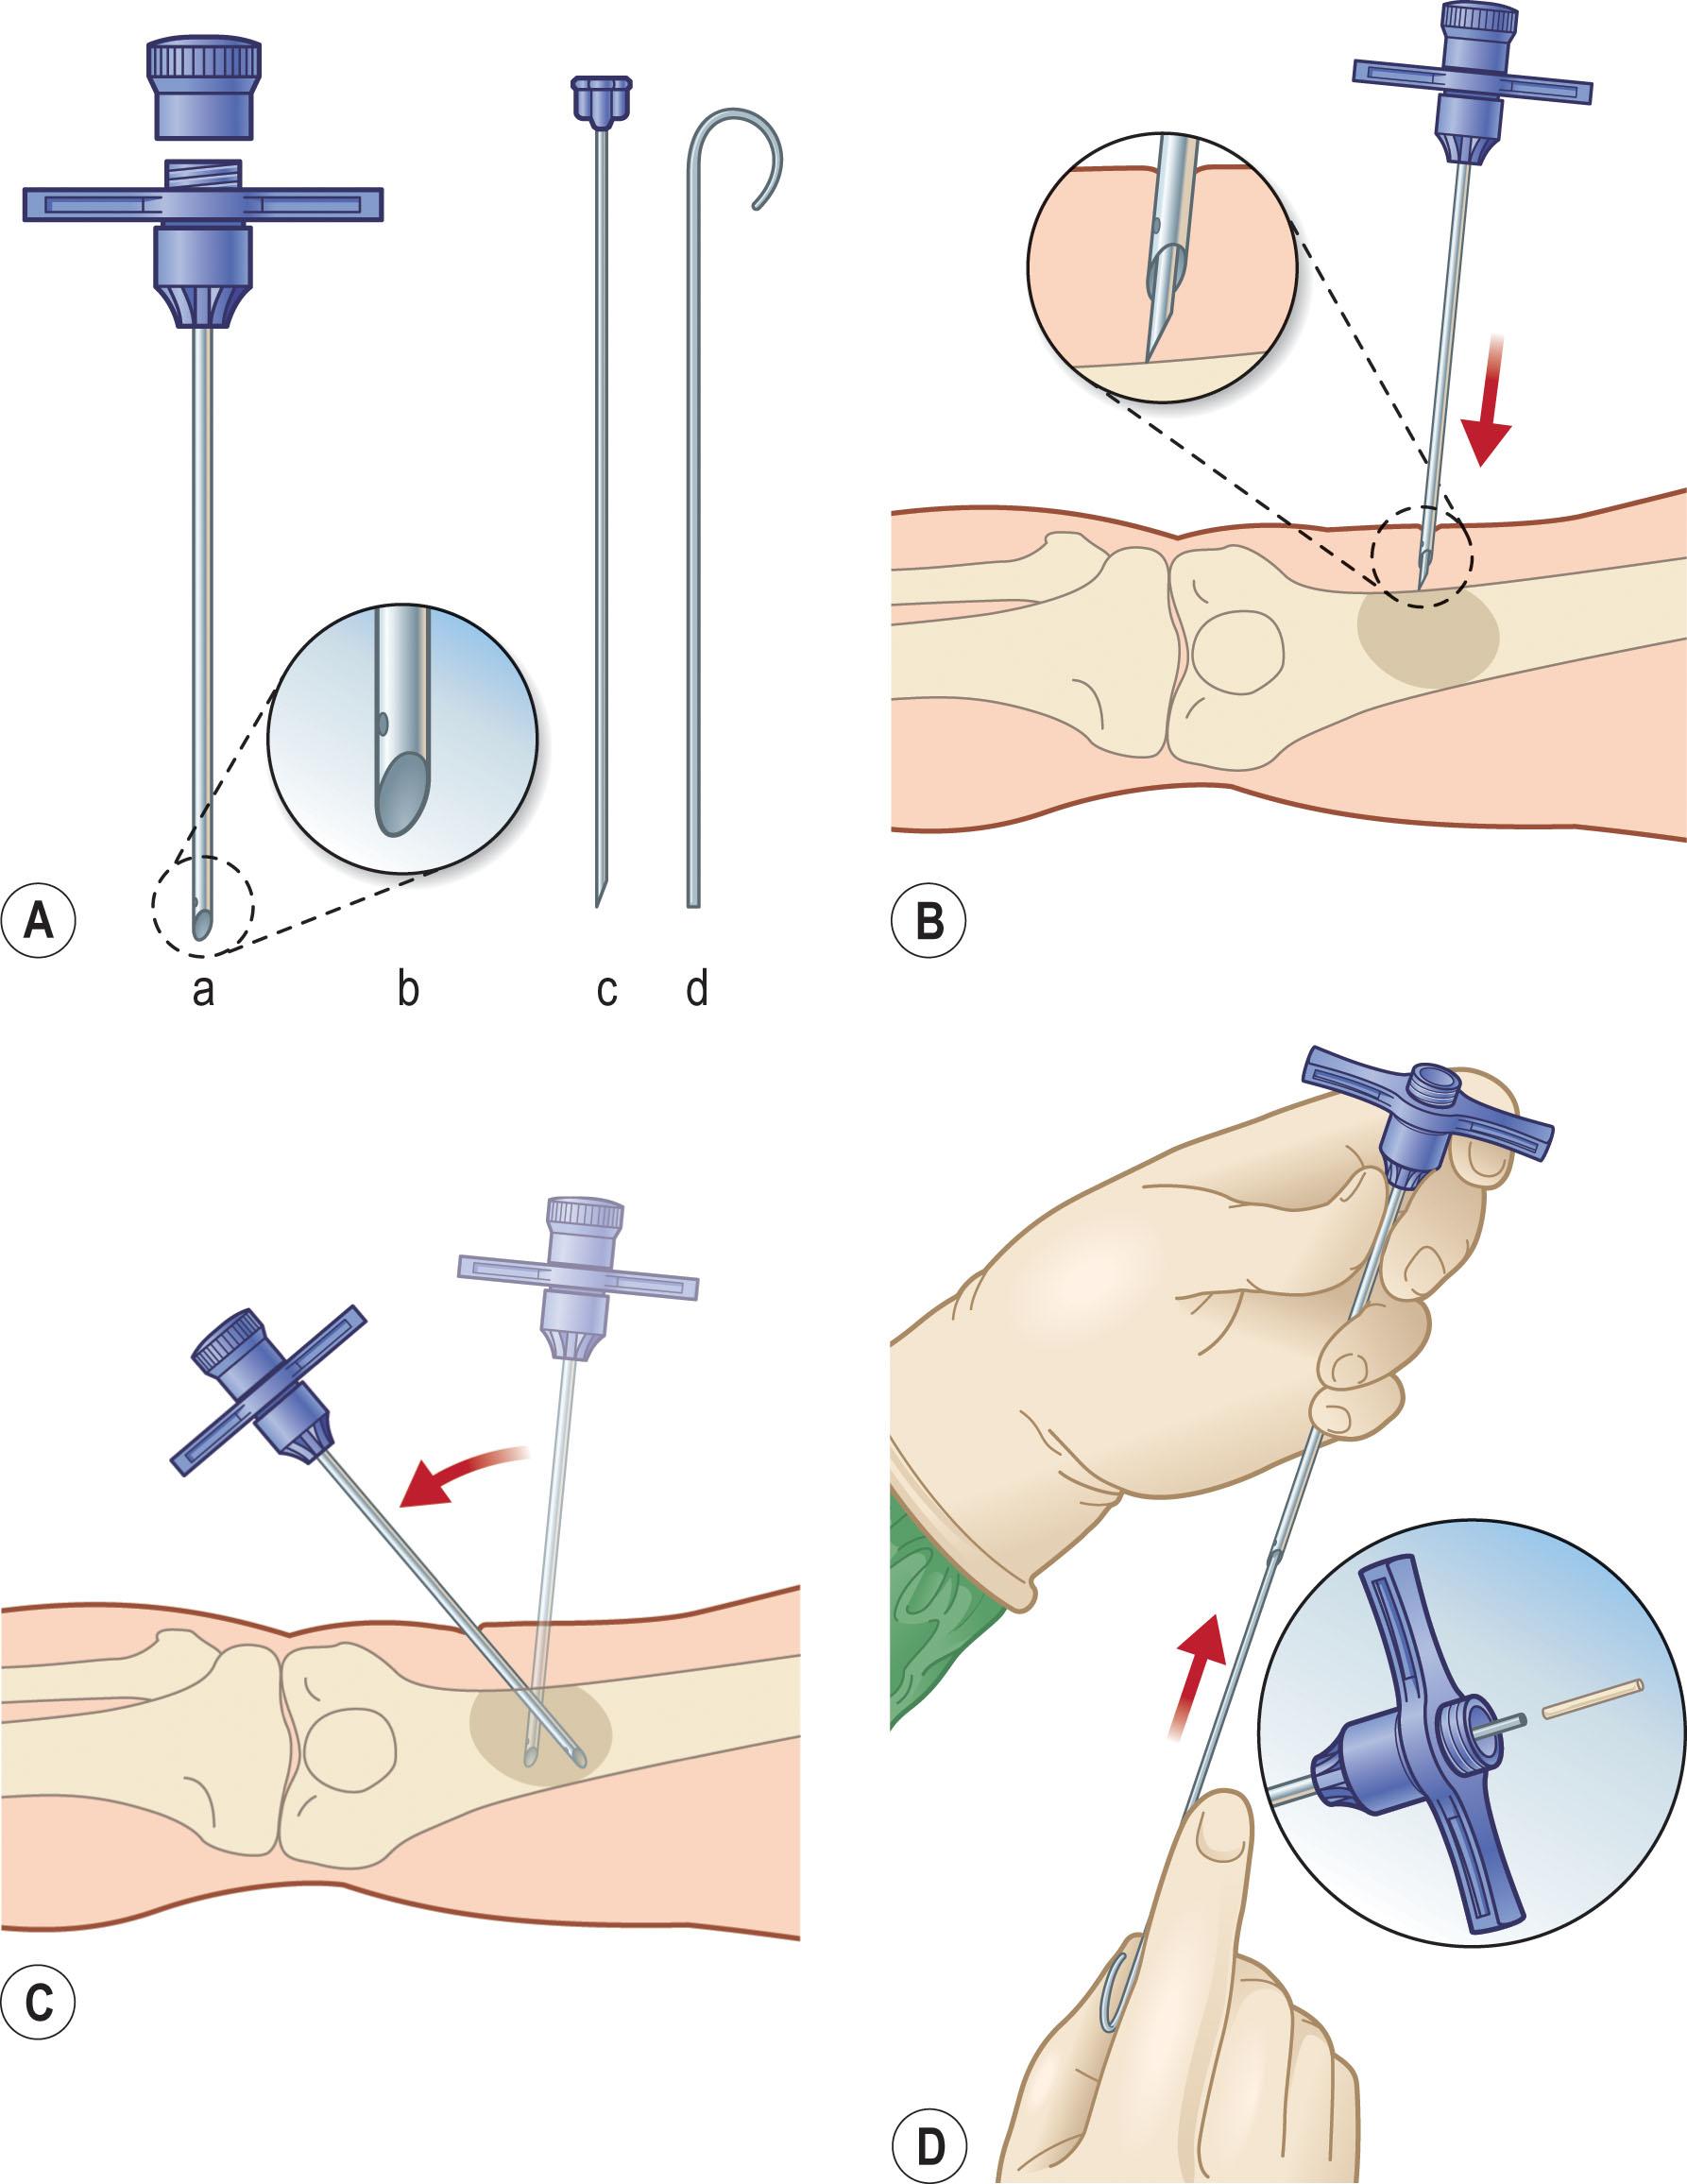 Figure 16.6, (A) The Jamshidi bone biopsy needle, cannula, and screw-on cap (a), tapered point (b), pointed stylet to advance cannula through soft tissues (c), and probe to expel specimen from cannula (d). (B) With the stylet locked in place, the cannula is advanced through the soft tissue until bone is reached. The inset is a close-up view showing stylet against bone cortex. (C) The stylet is removed, and the bone cortex is penetrated with the cannula. The cannula is withdrawn, and the procedure repeated with redirection of the instrument to obtain multiple core samples. (D) The probe is then inserted retrograde into the tip of the cannula to expel the specimen through the base ( inset ).